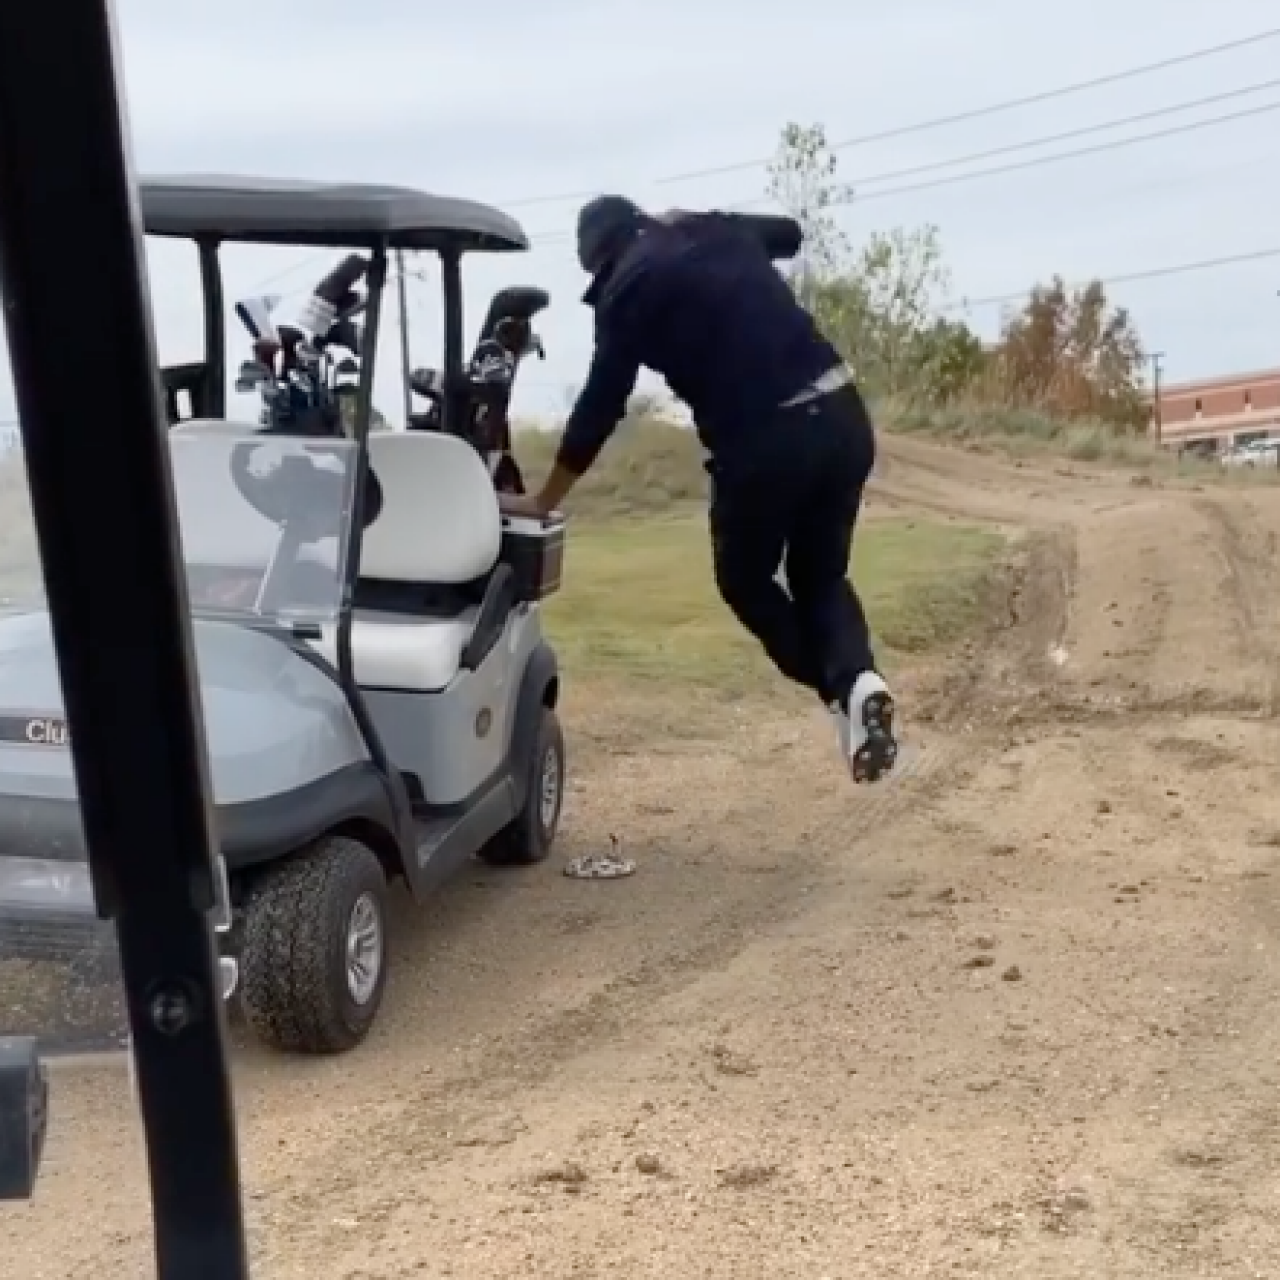 Tony Romo might have actual nightmares after he fell victim to the ole fake snake  prank | This is the Loop | Golf Digest